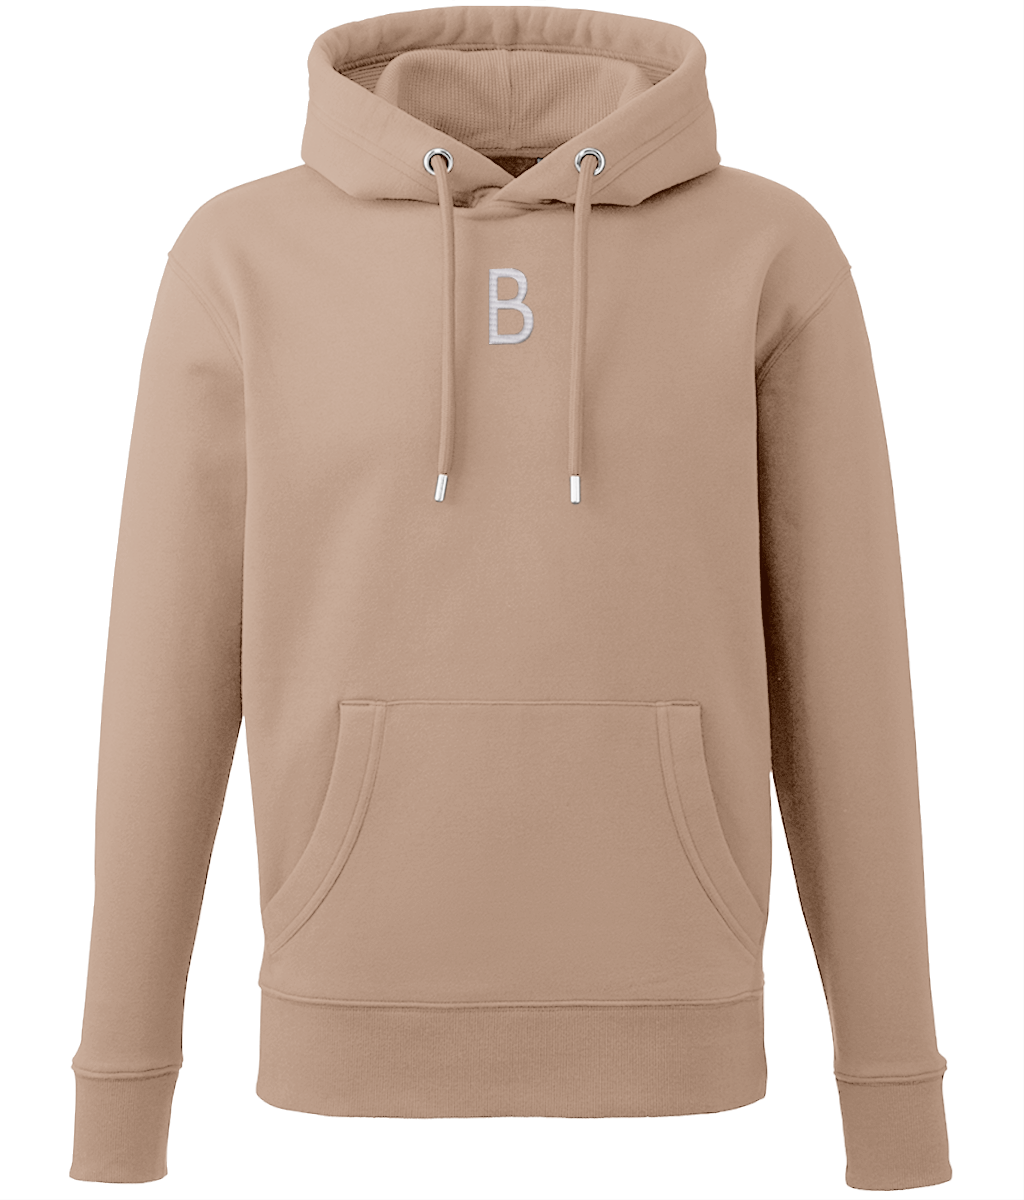 The Signature Embroidered Hoodie